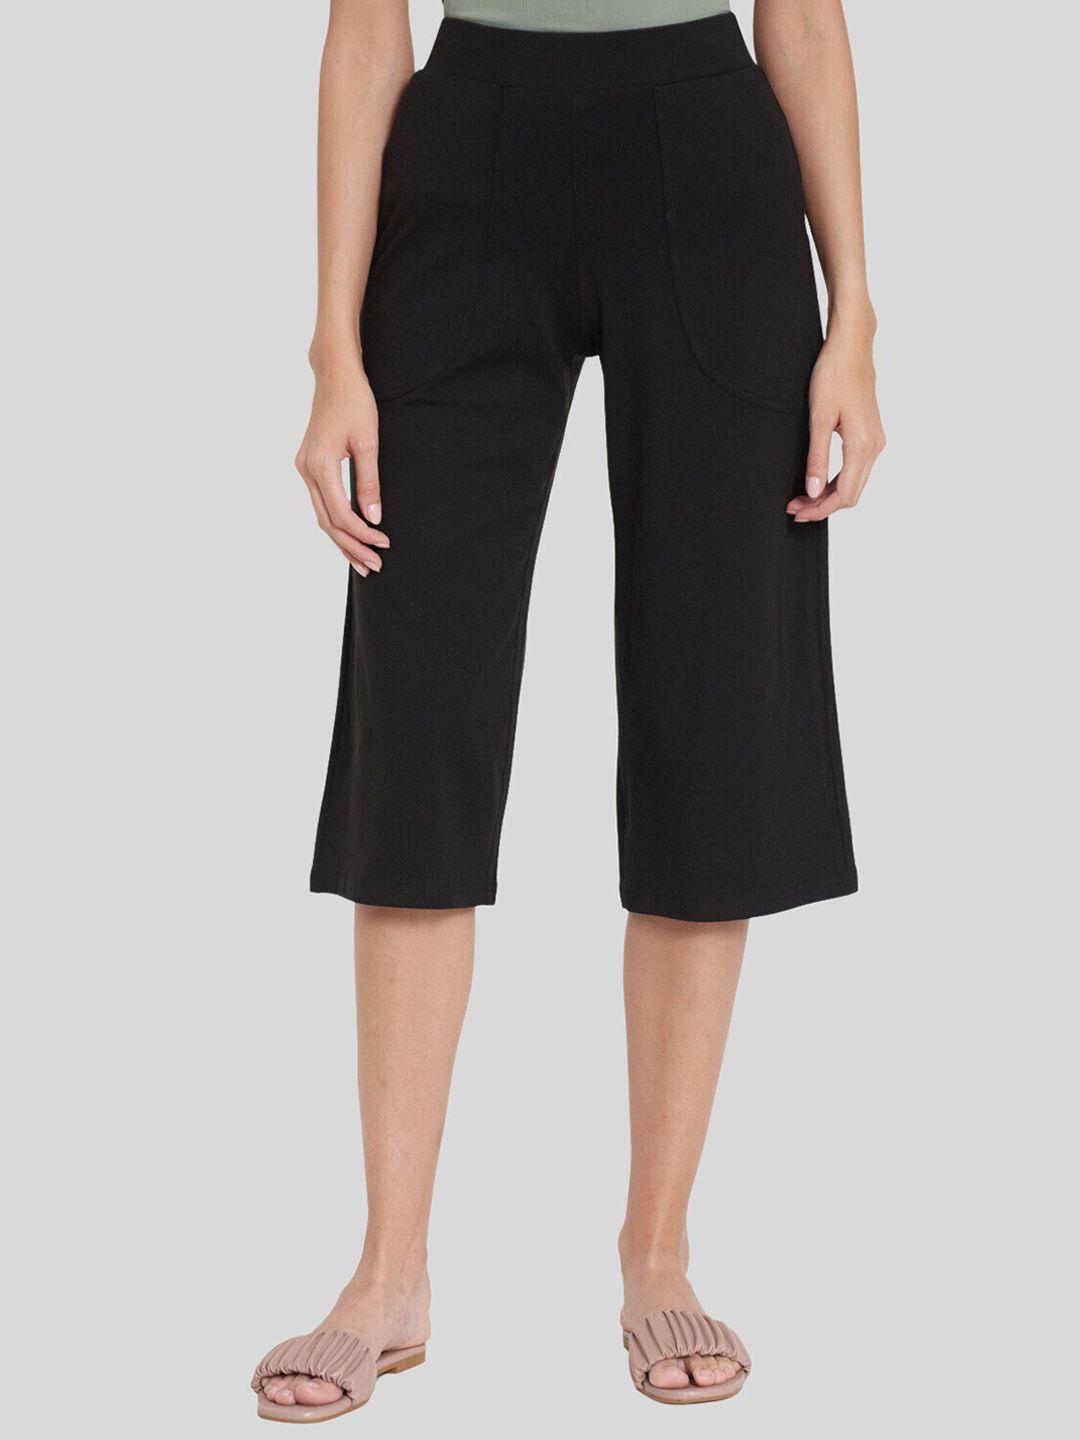 unmade women mid rise culottes trousers